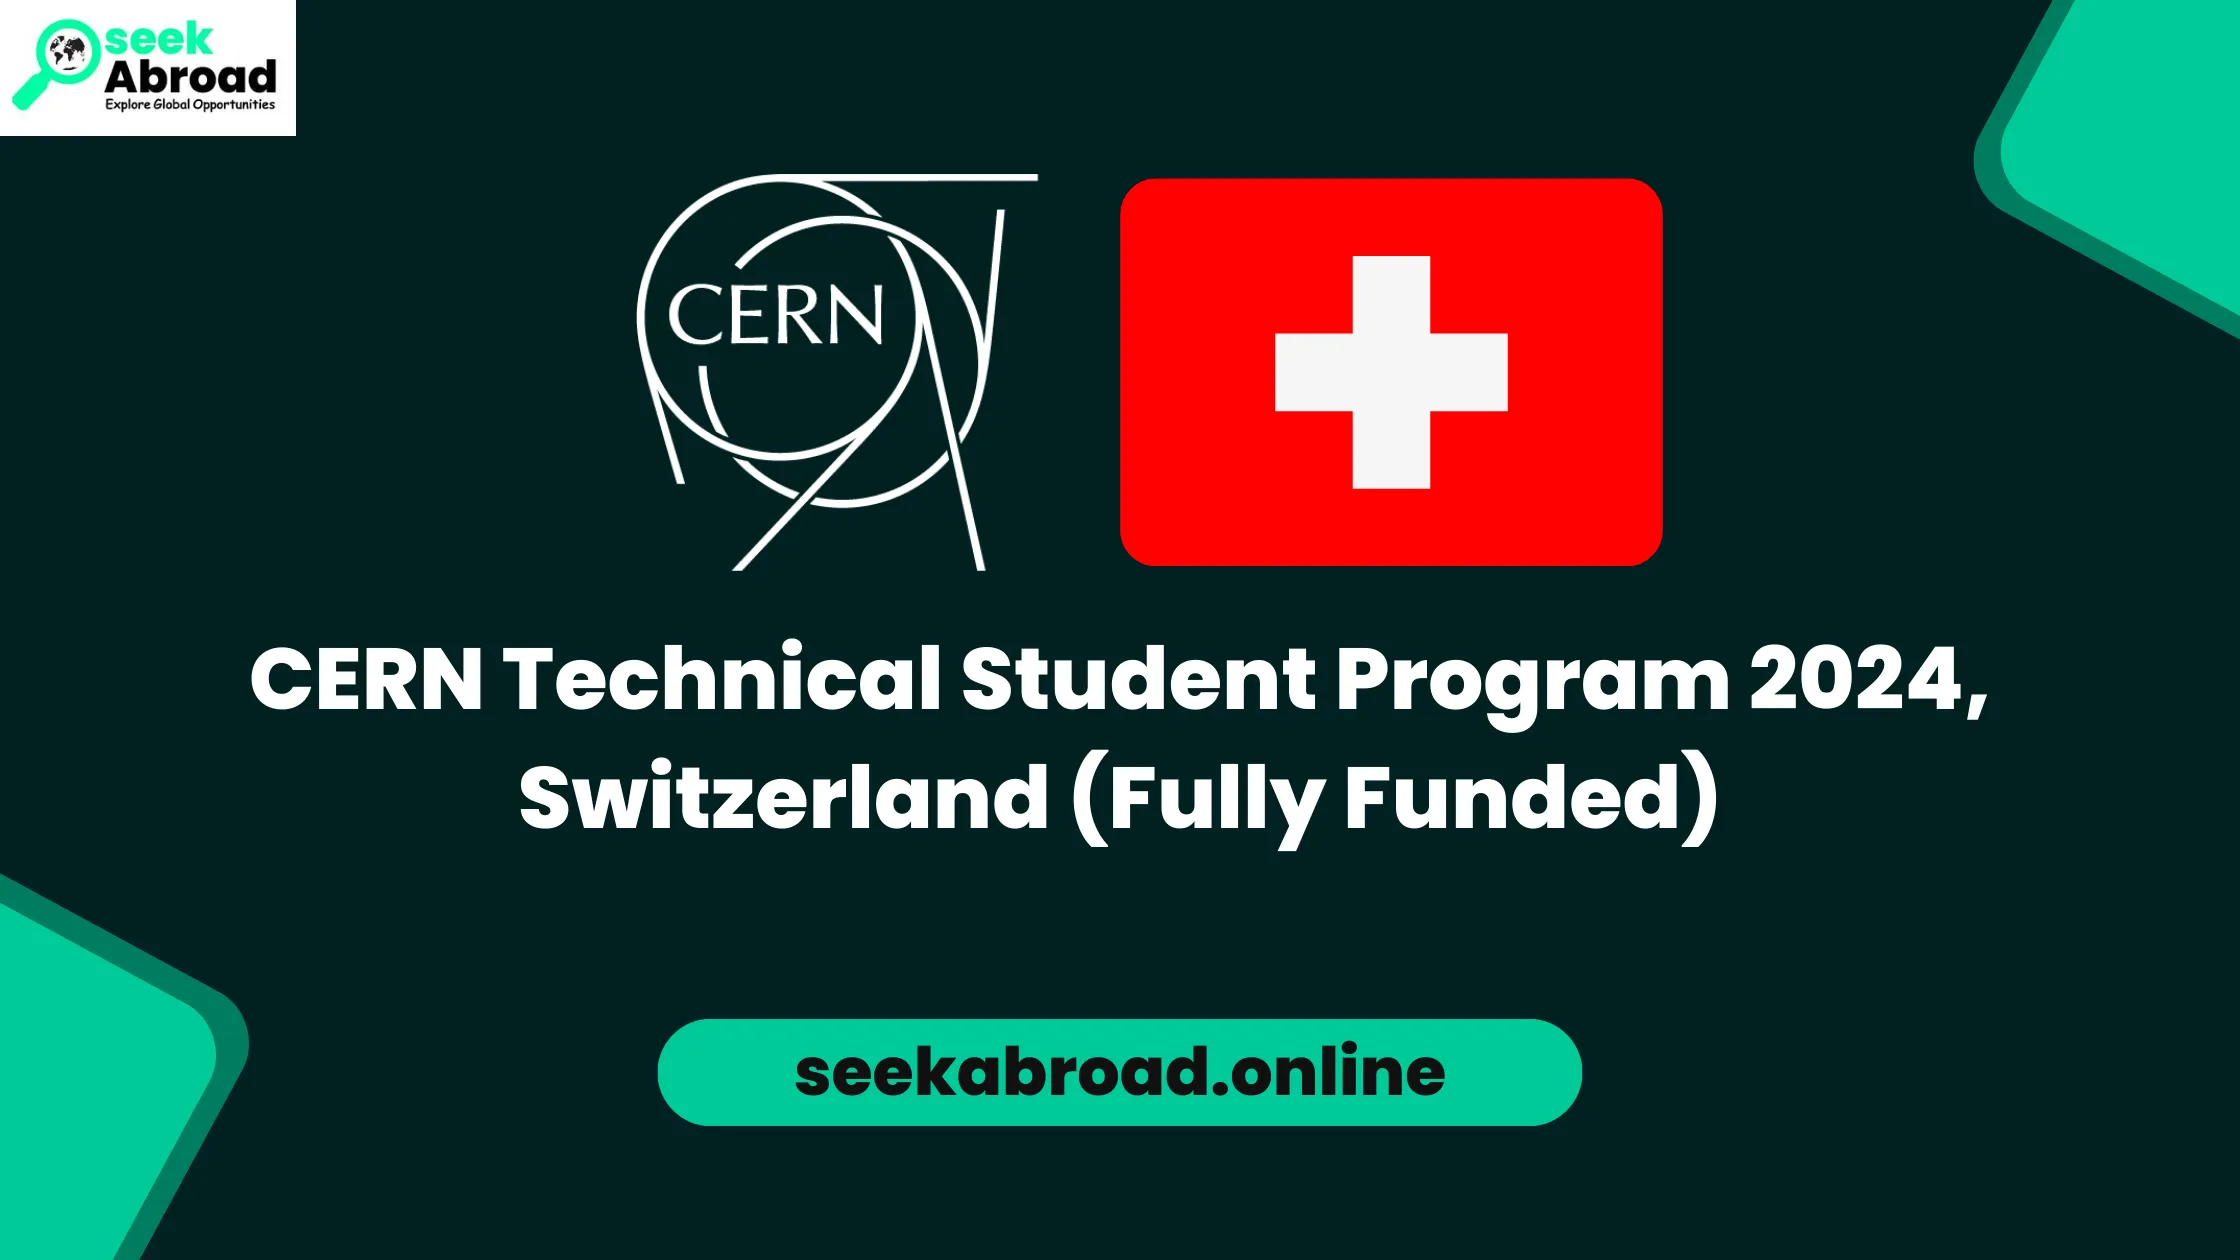 CERN Technical Student Program 2024 (Fully Funded)